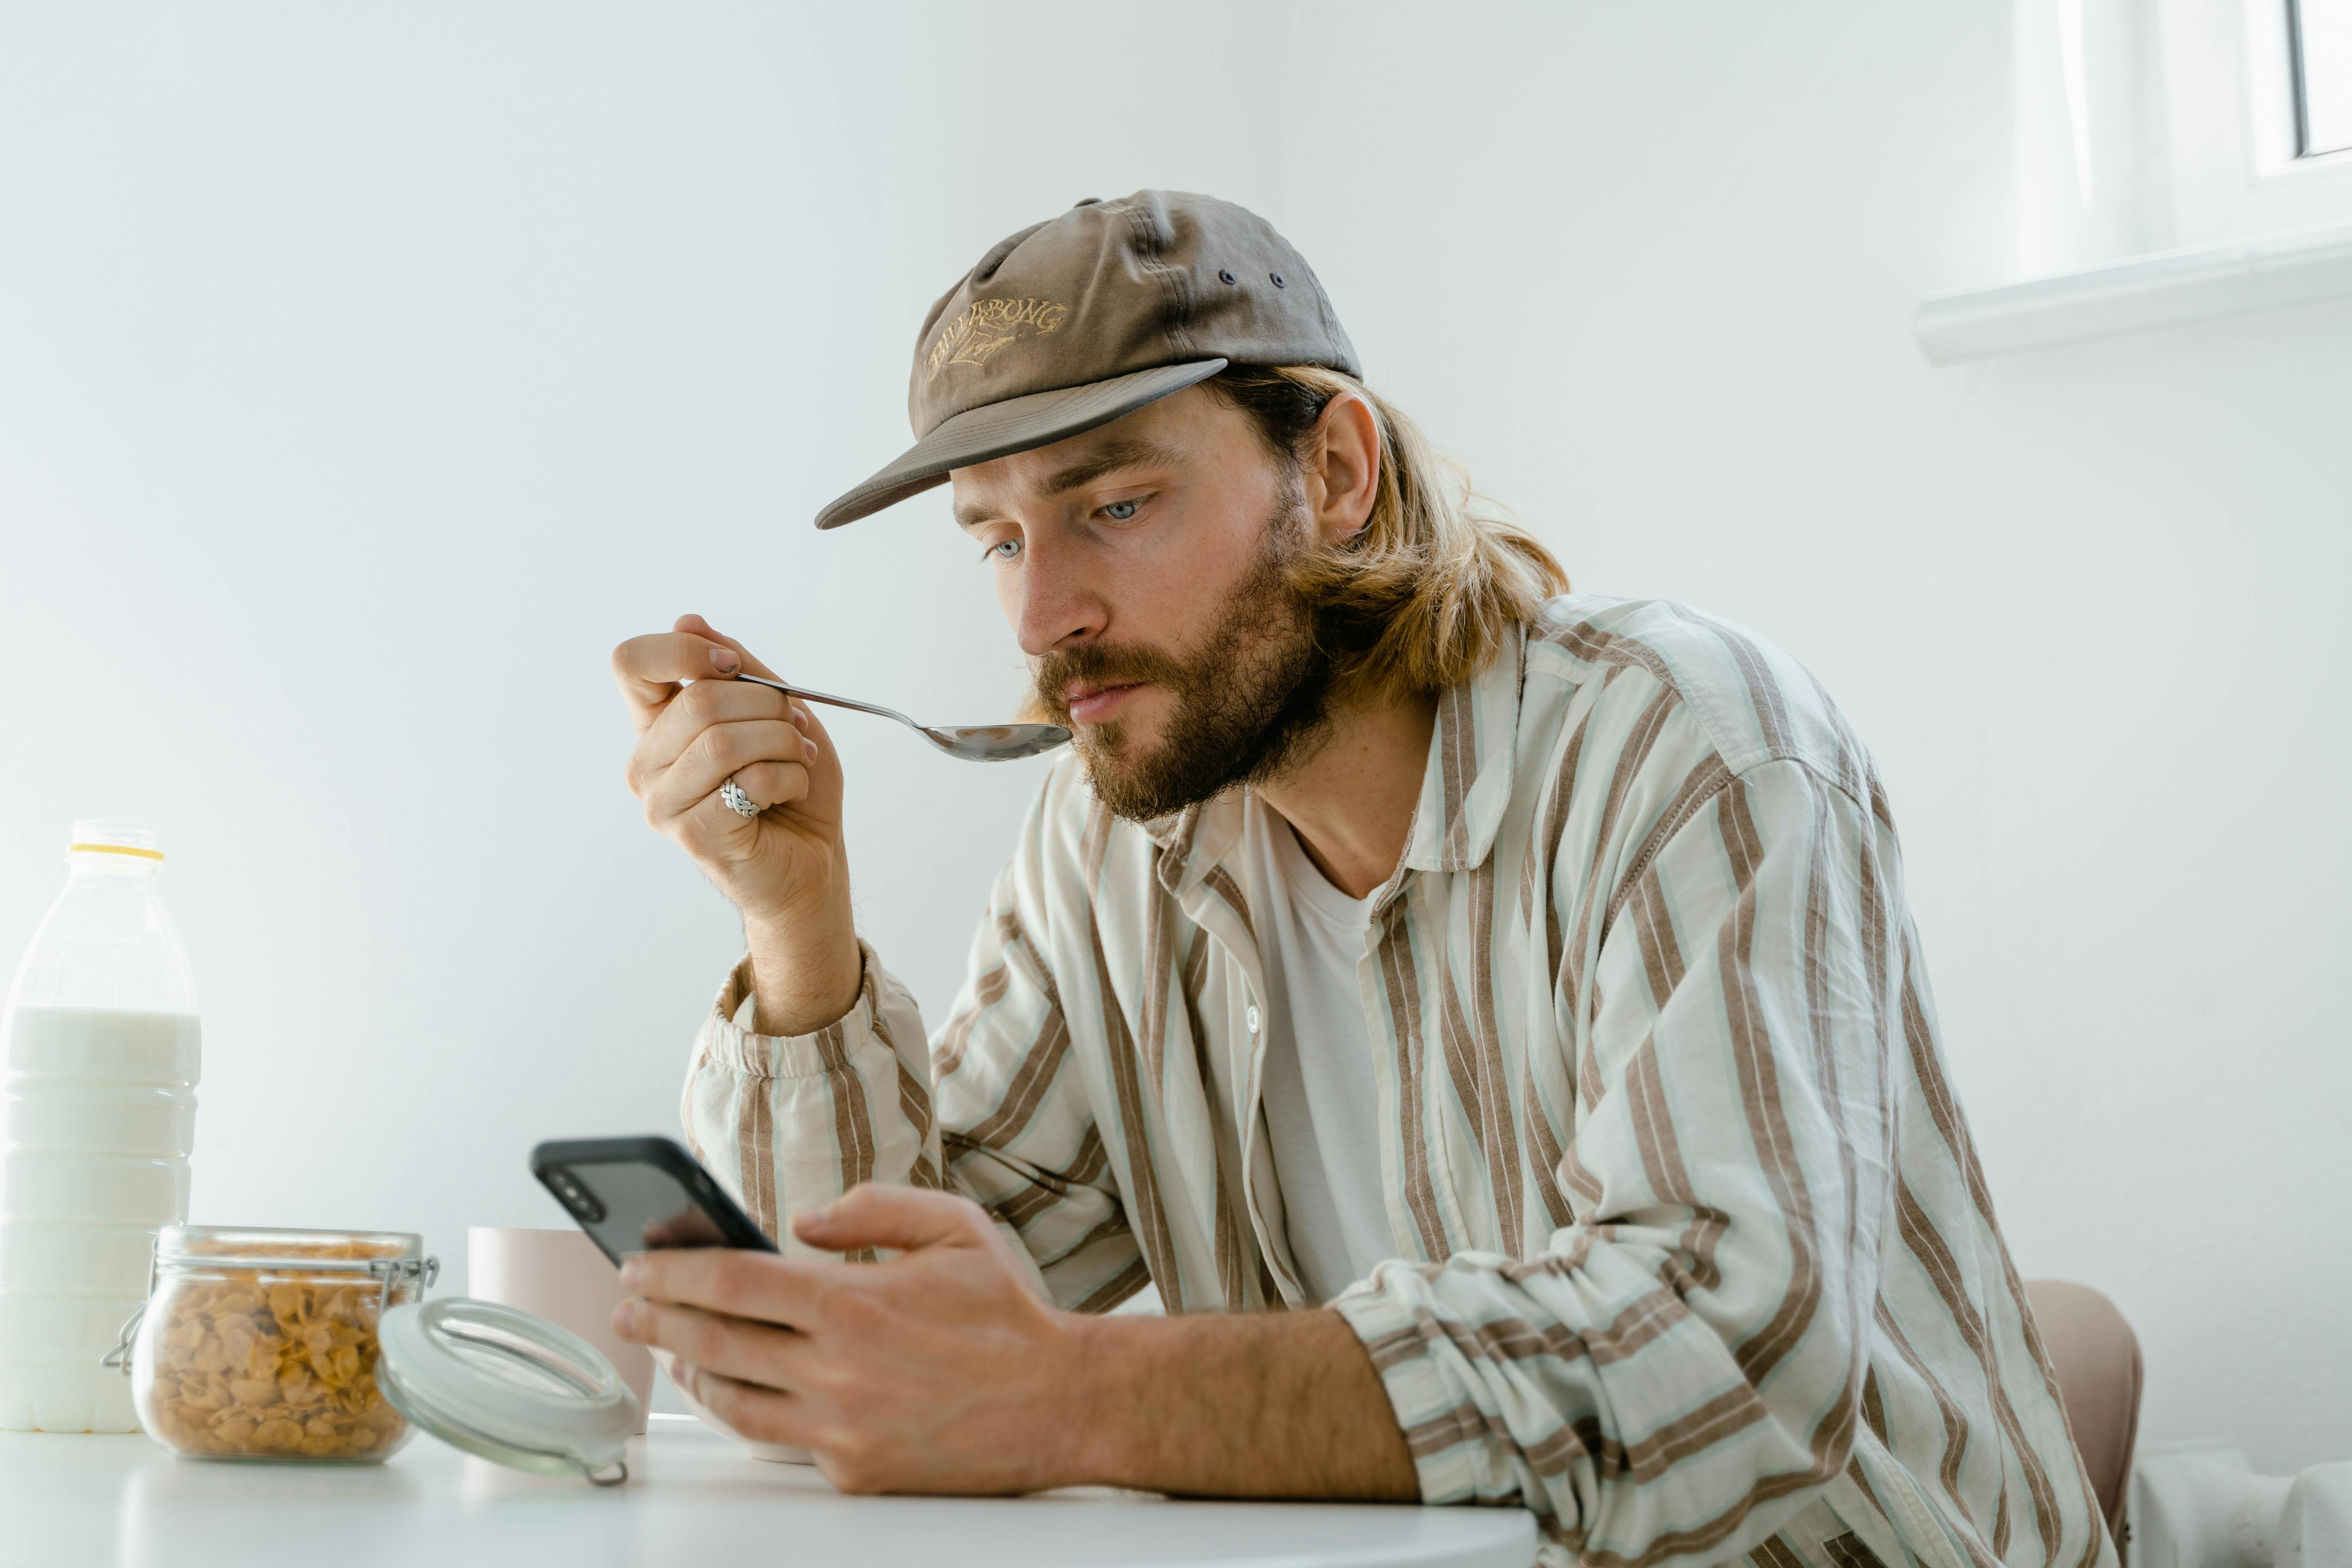 A man texting while eating breakfast | Source: Pexels